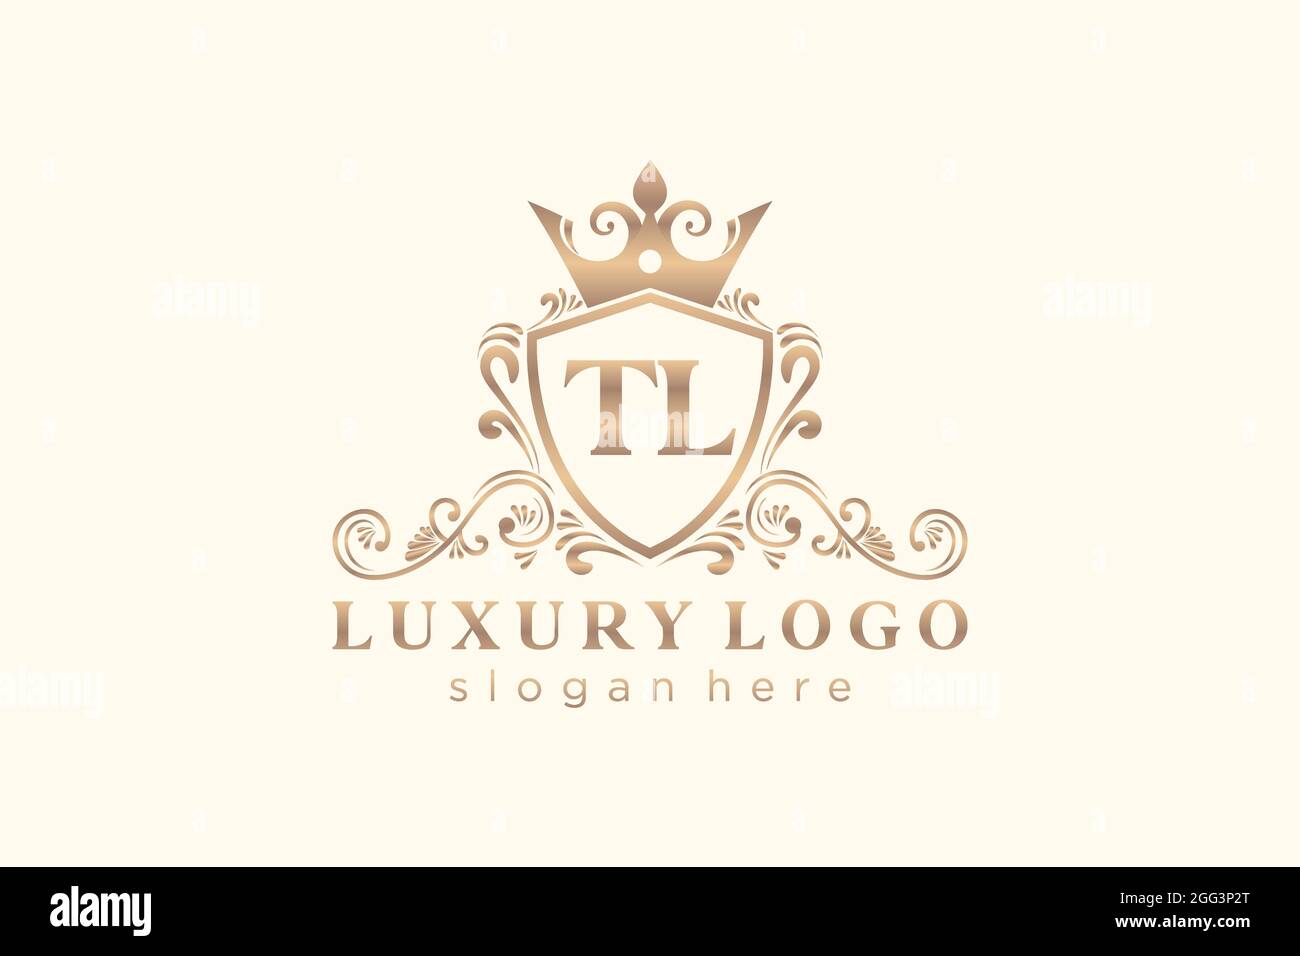 TL Letter Royal Luxury Logo template in vector art for Restaurant, Royalty, Boutique, Cafe, Hotel, Heraldic, Jewelry, Fashion and other vector illustr Stock Vector